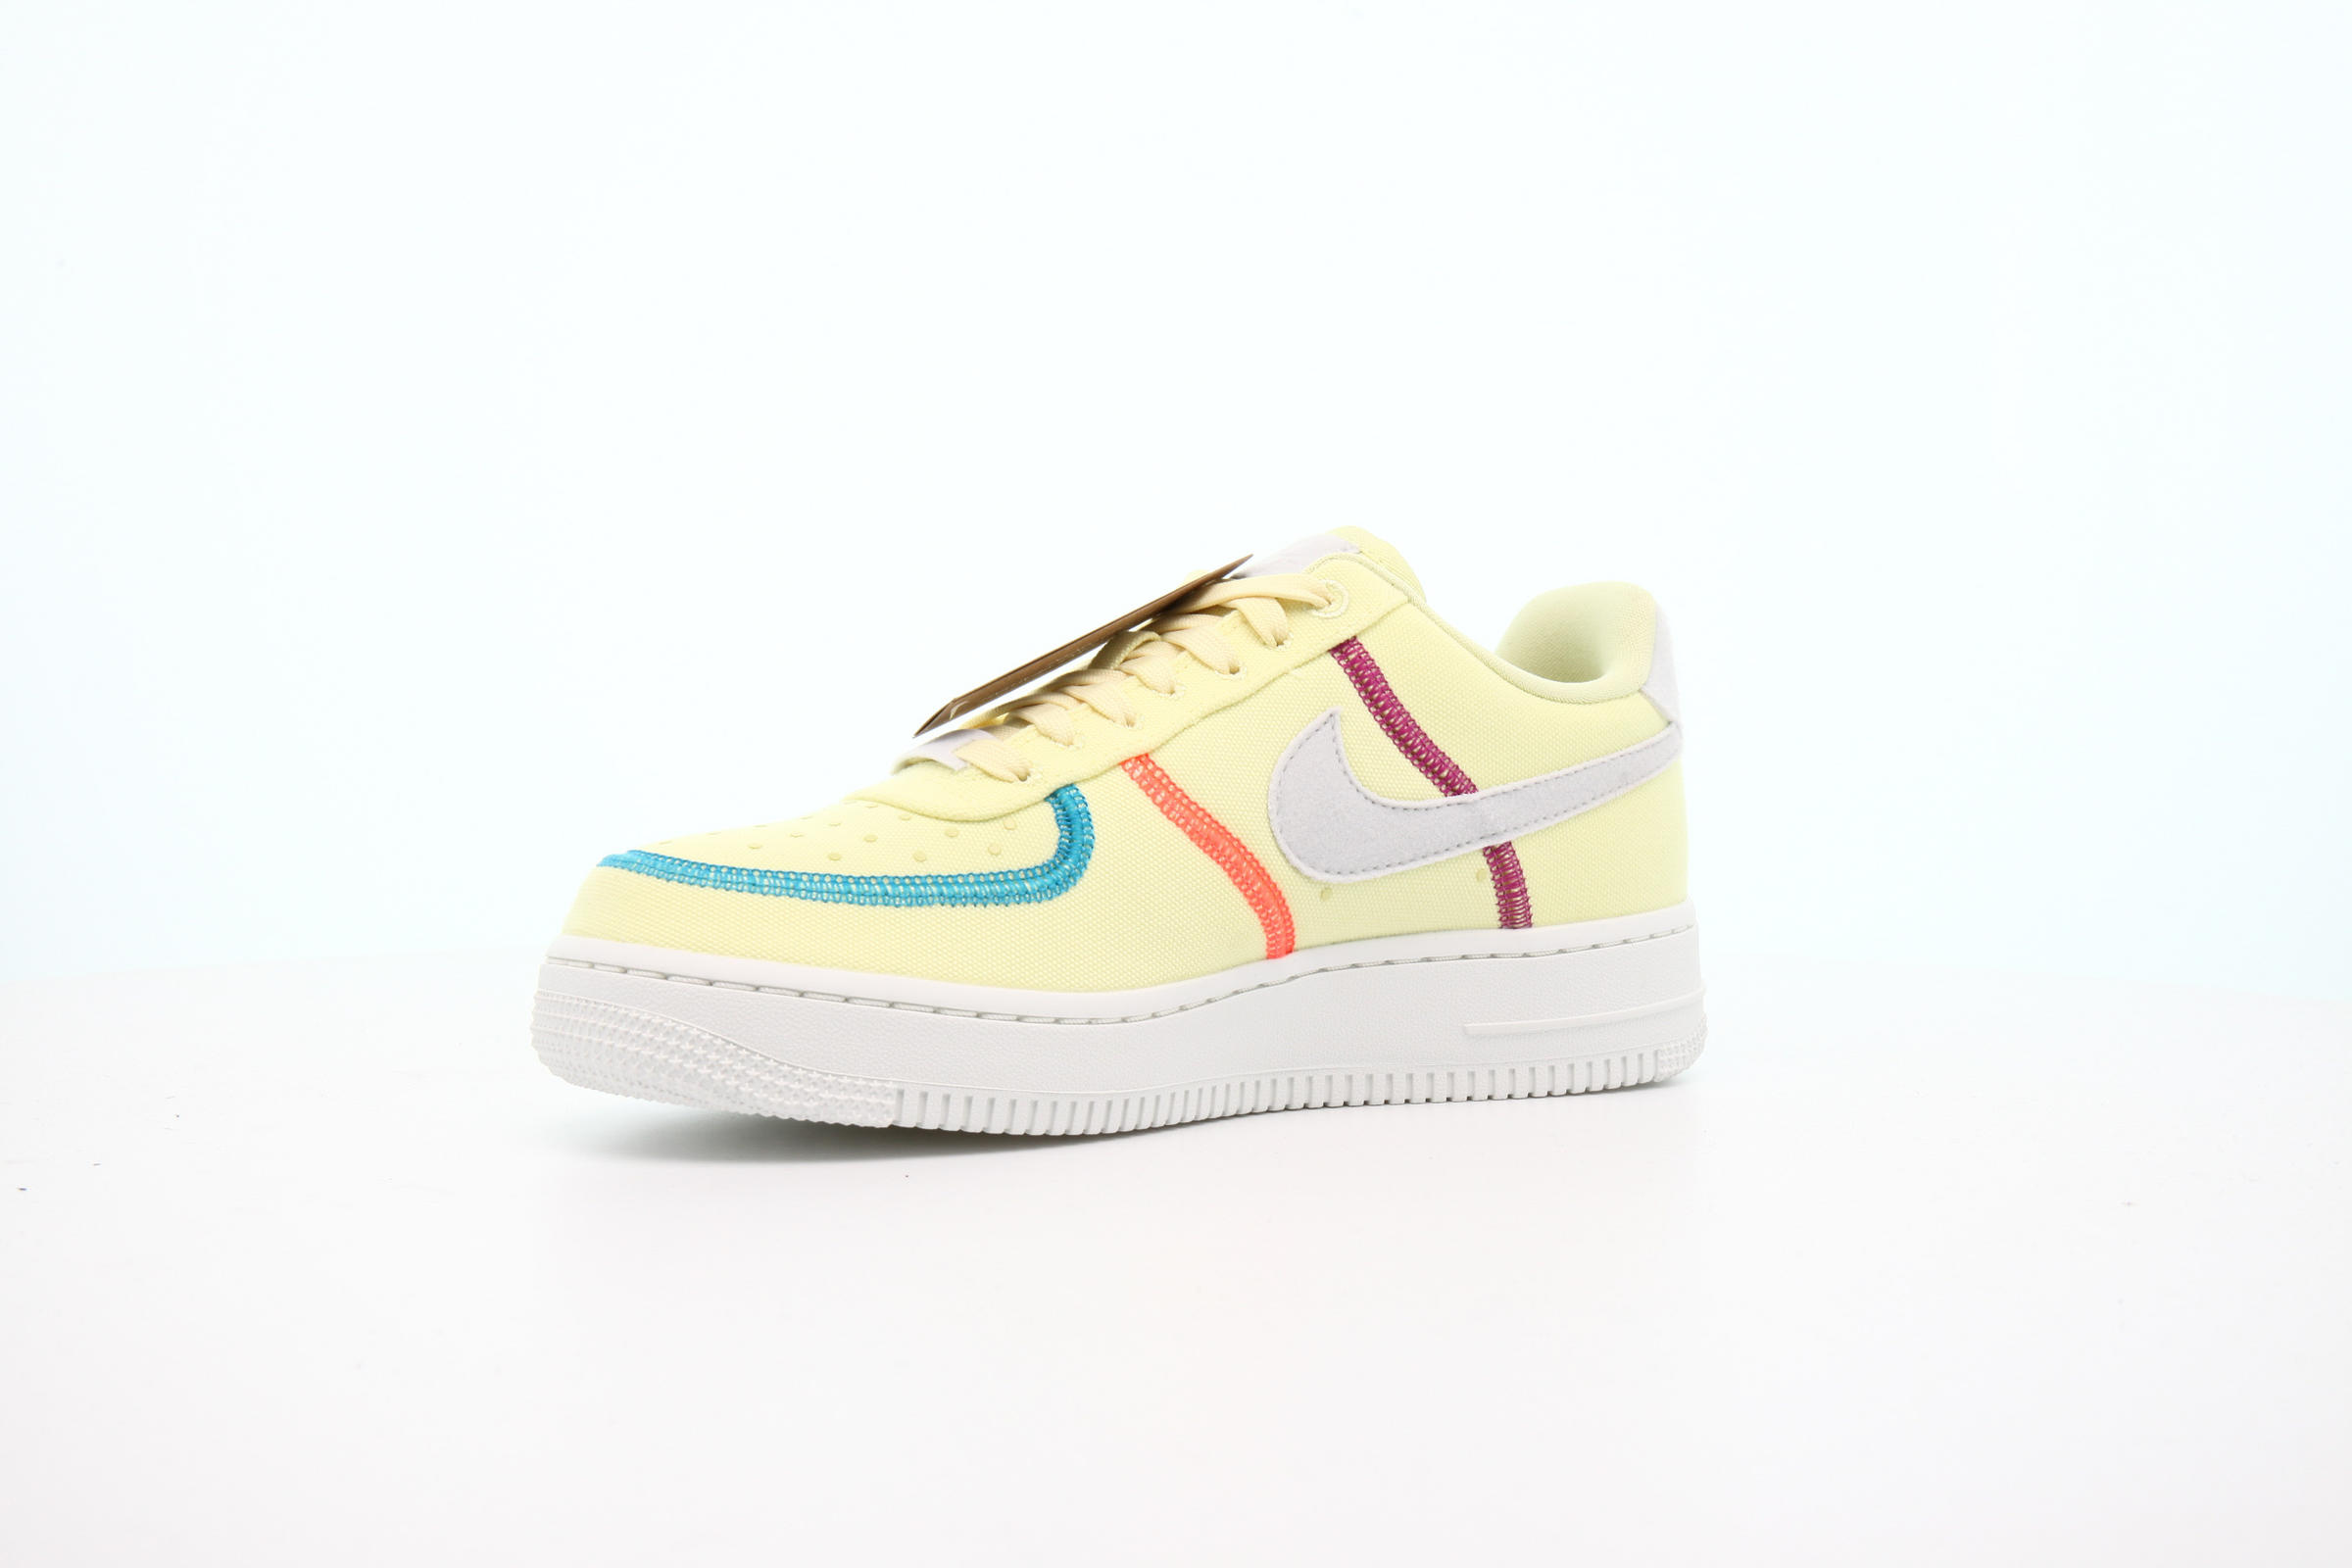 Nike WMNS AIR FORCE 1 '07 LX "LIFE LIME"